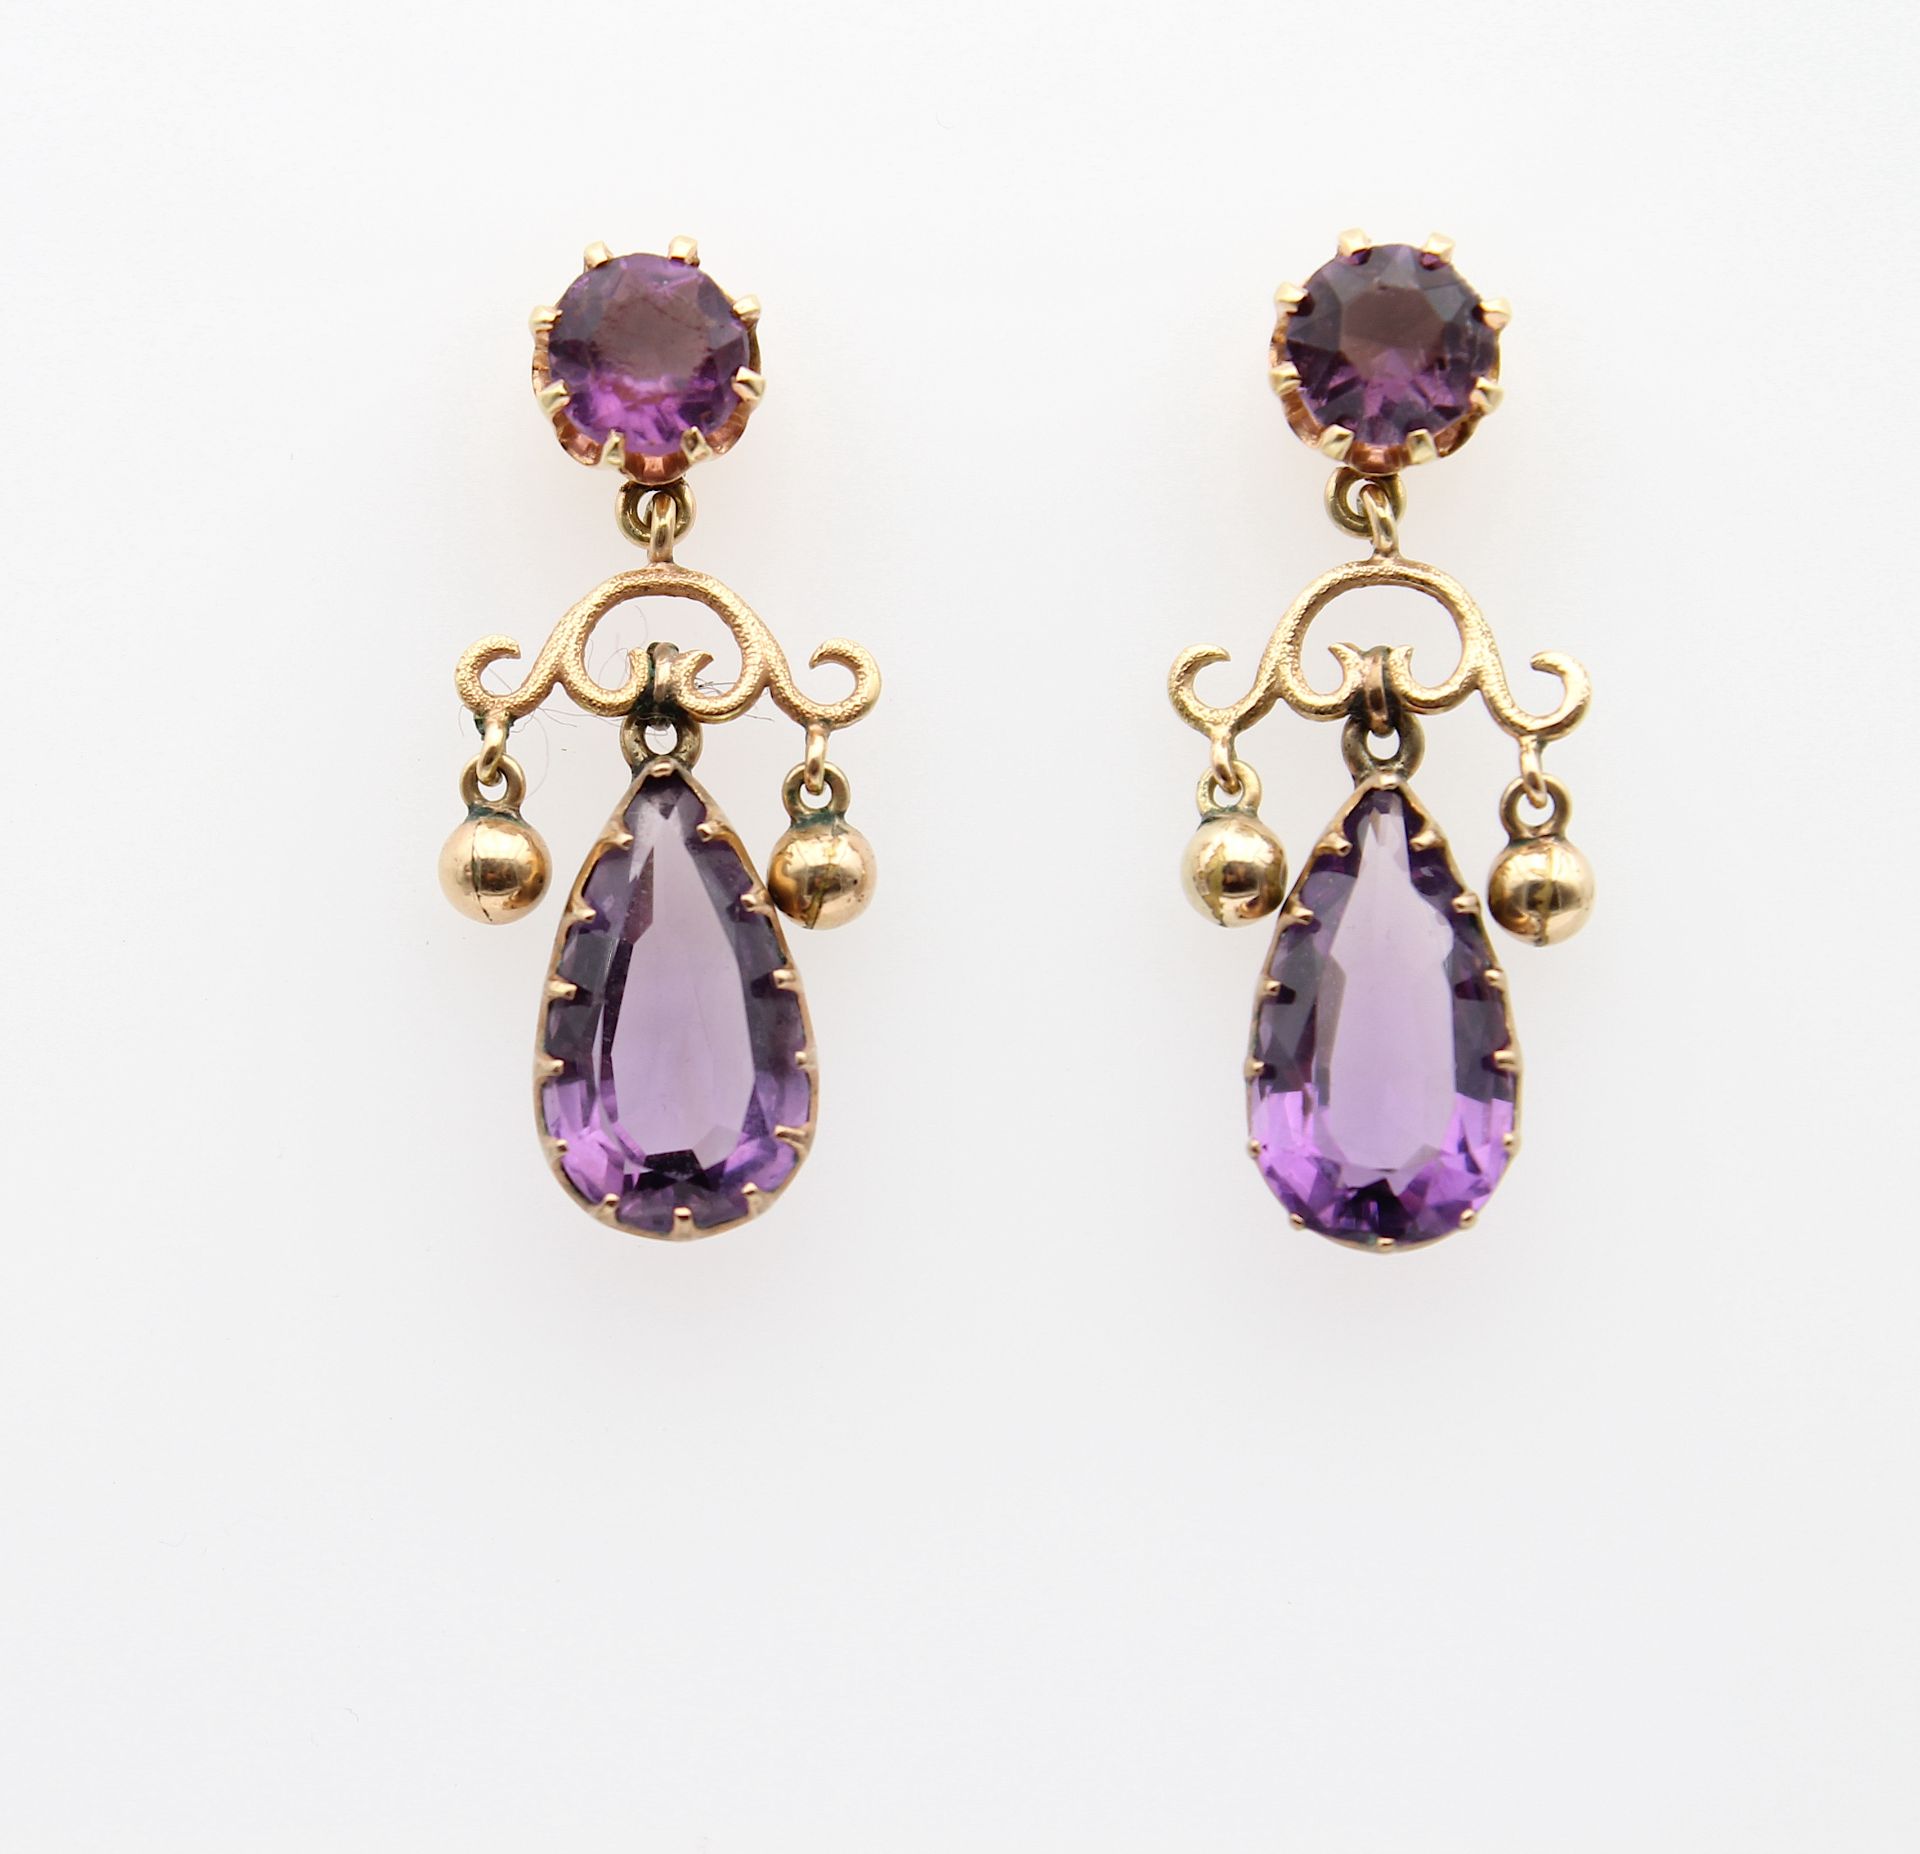 Charming earrings with amethysts and glass